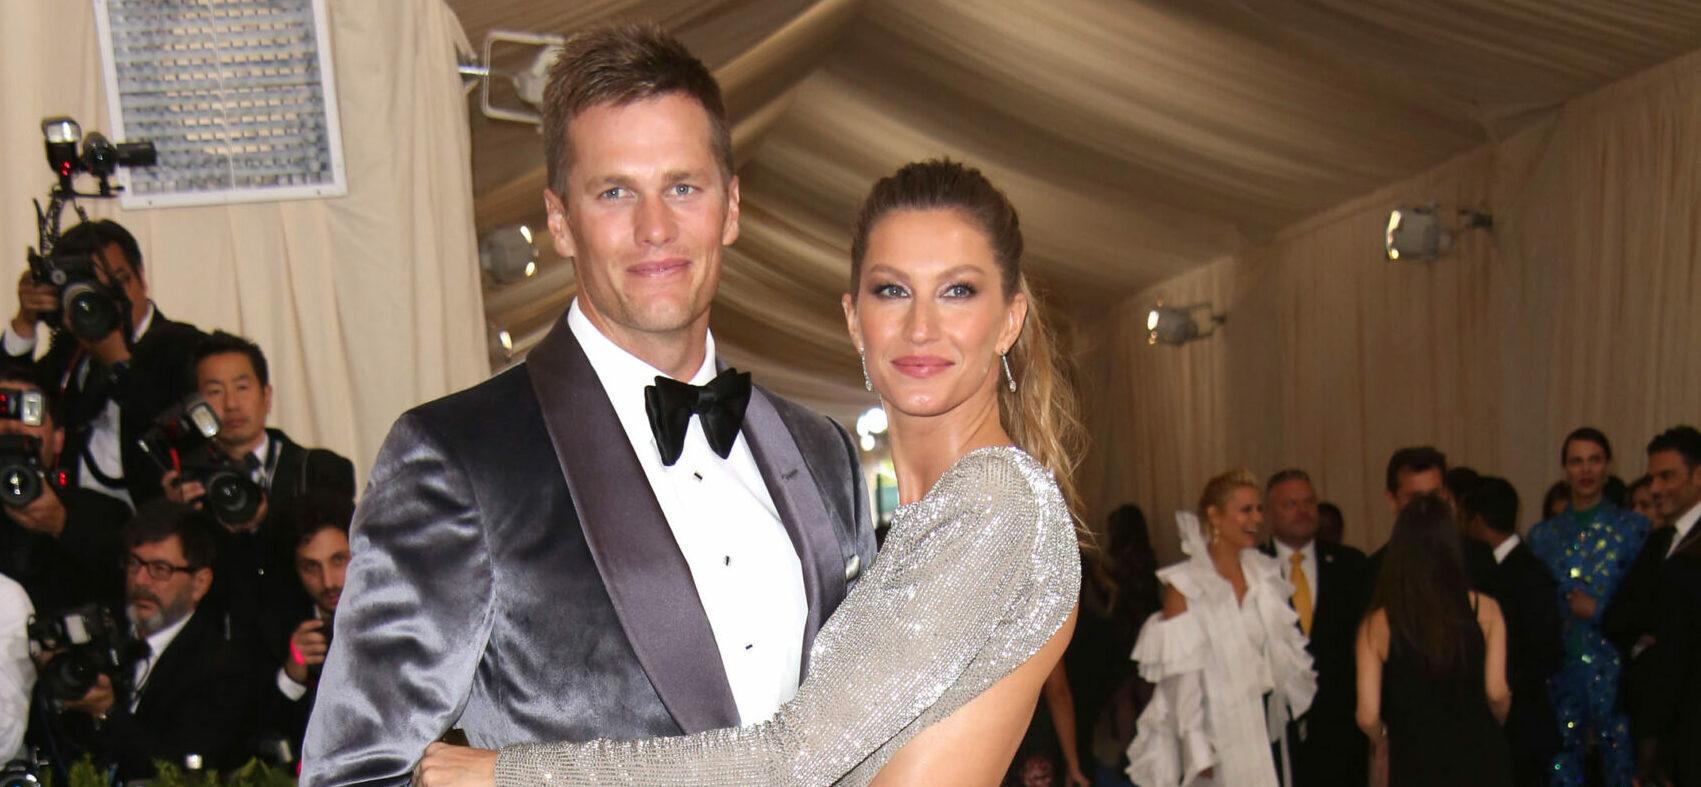 Gisele Bündchen Unbothered By Tom Brady’s Romance With Irina Shayk And ‘Wants Him To Be Happy’